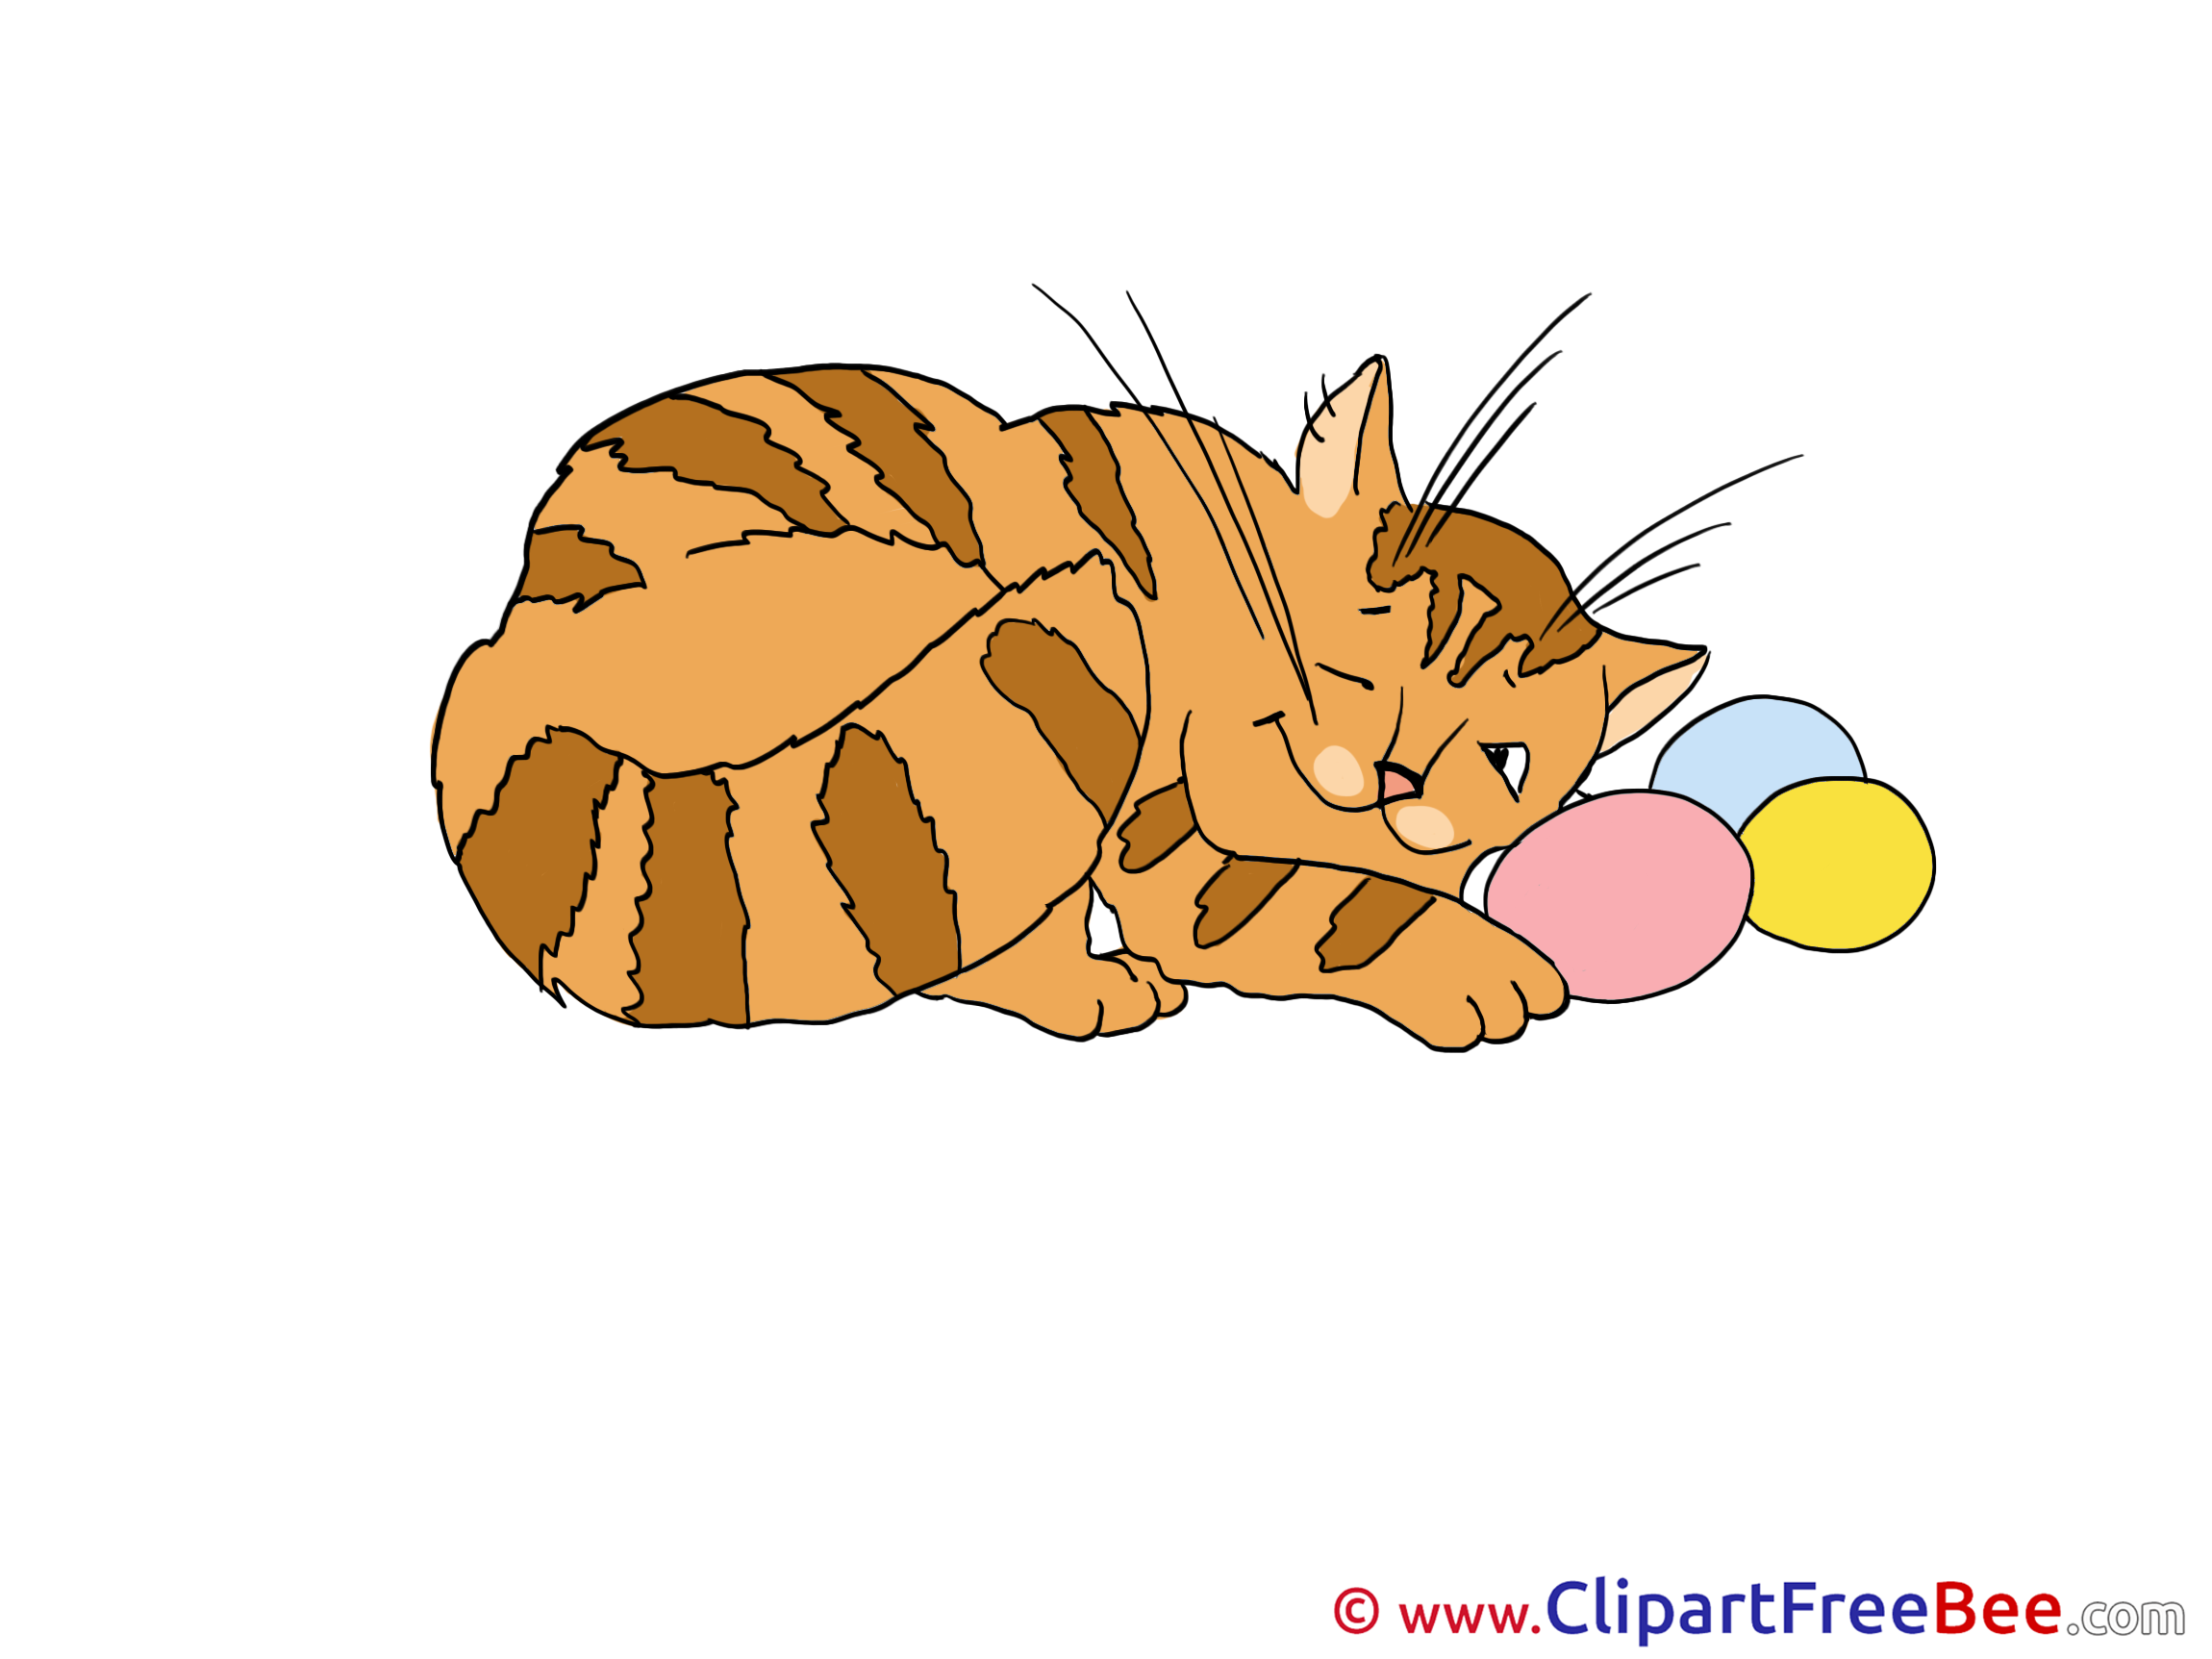 Sleeping Cat printable Images for download